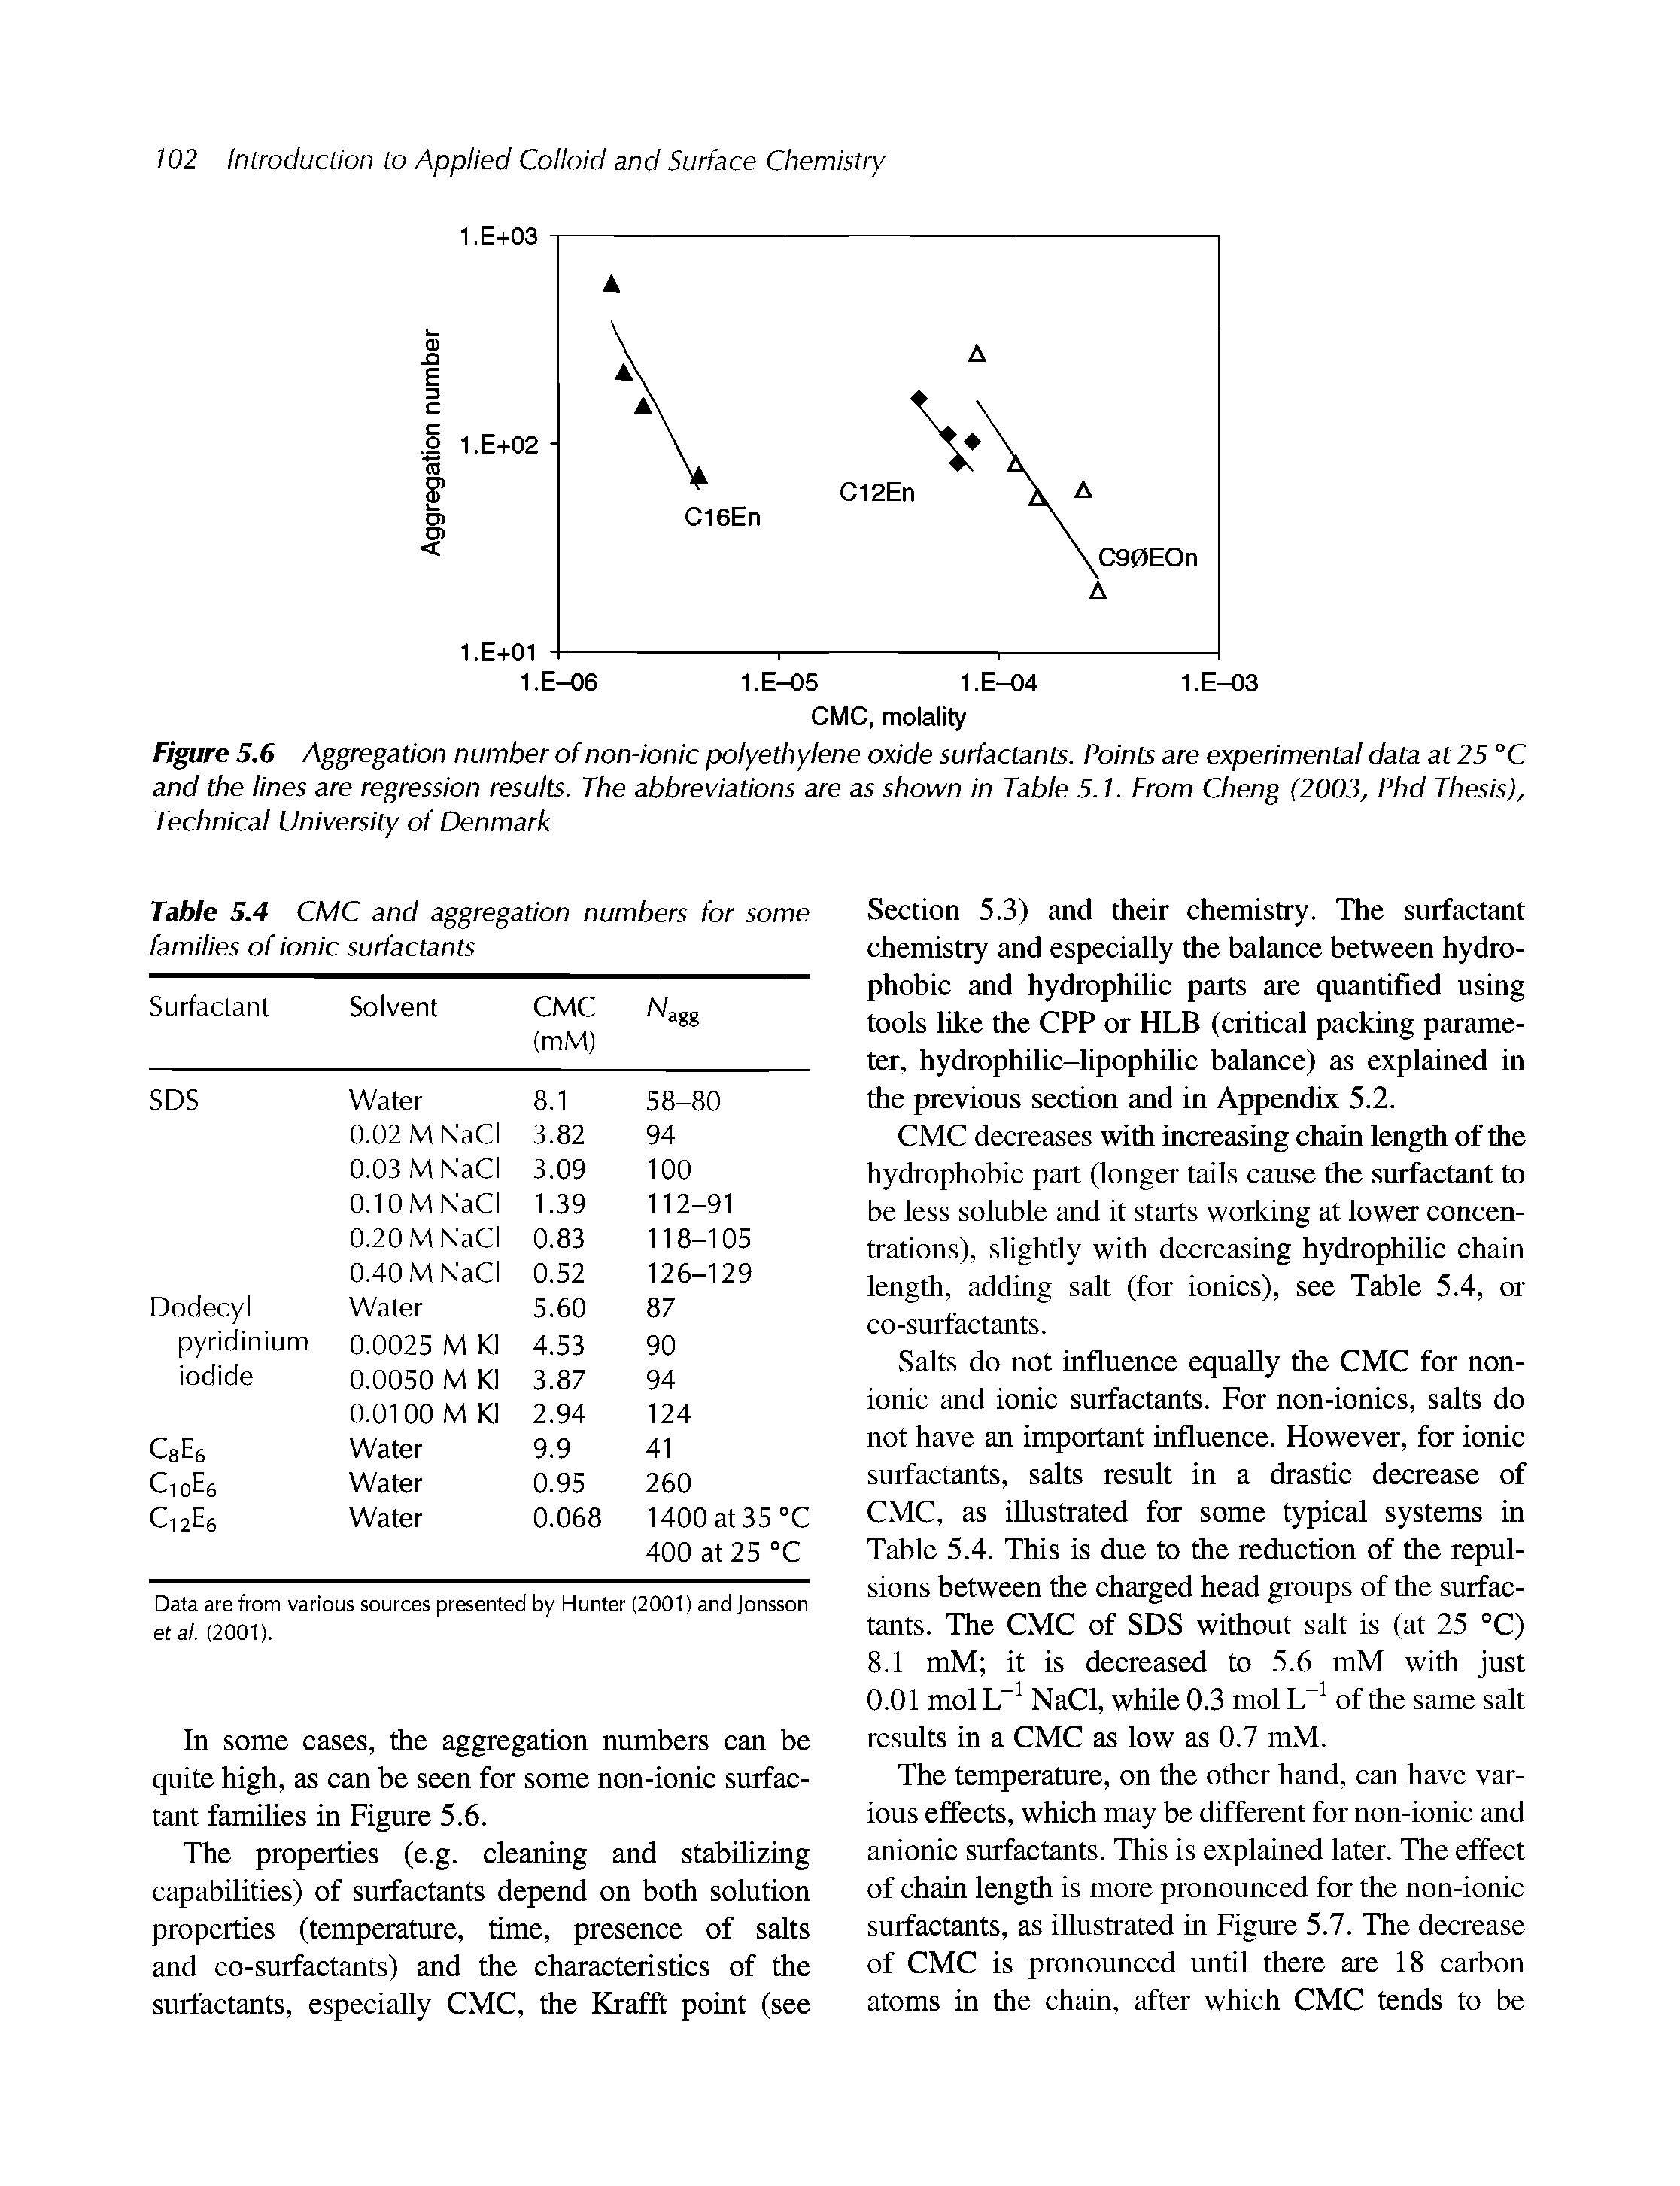 Figure 5.6 Aggregation number of non-ionic polyethylene oxide surfactants. Points are experimental data at 25 °C and the lines are regression results. The abbreviations are as shown in Table 5.1. From Cheng (2003, Phd Thesis), Technical University of Denmark...